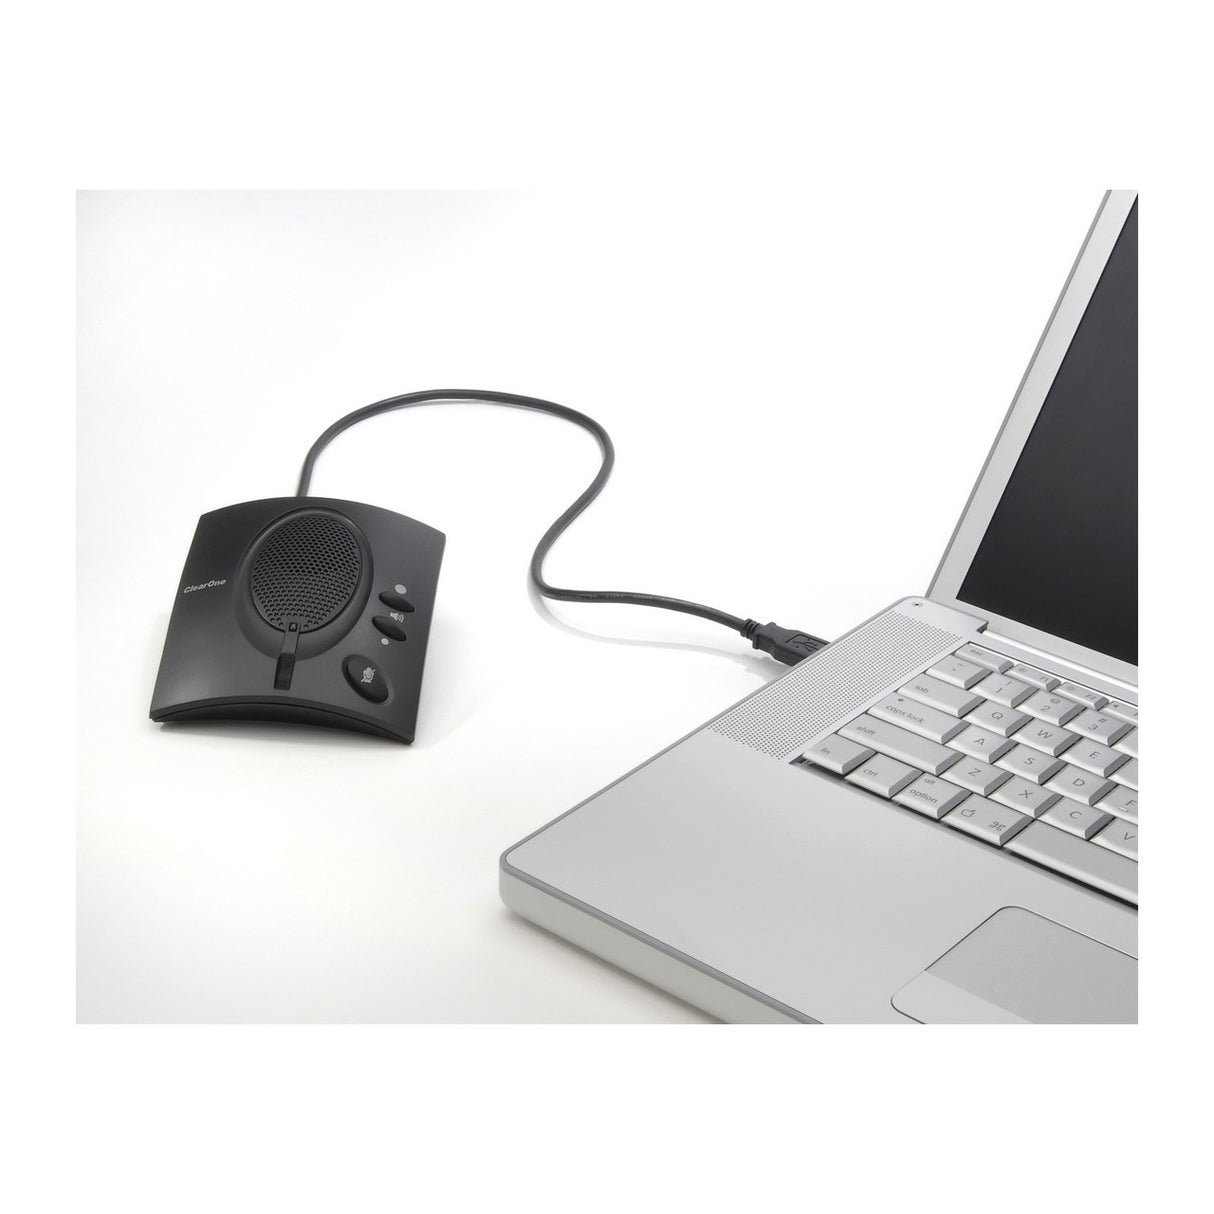 ClearOne CHAT 50 USB Plus International | Personal USB 2.0 Noise Cancellation PC Conferencing Speakerphone with International Power Clips 910-159-002-01